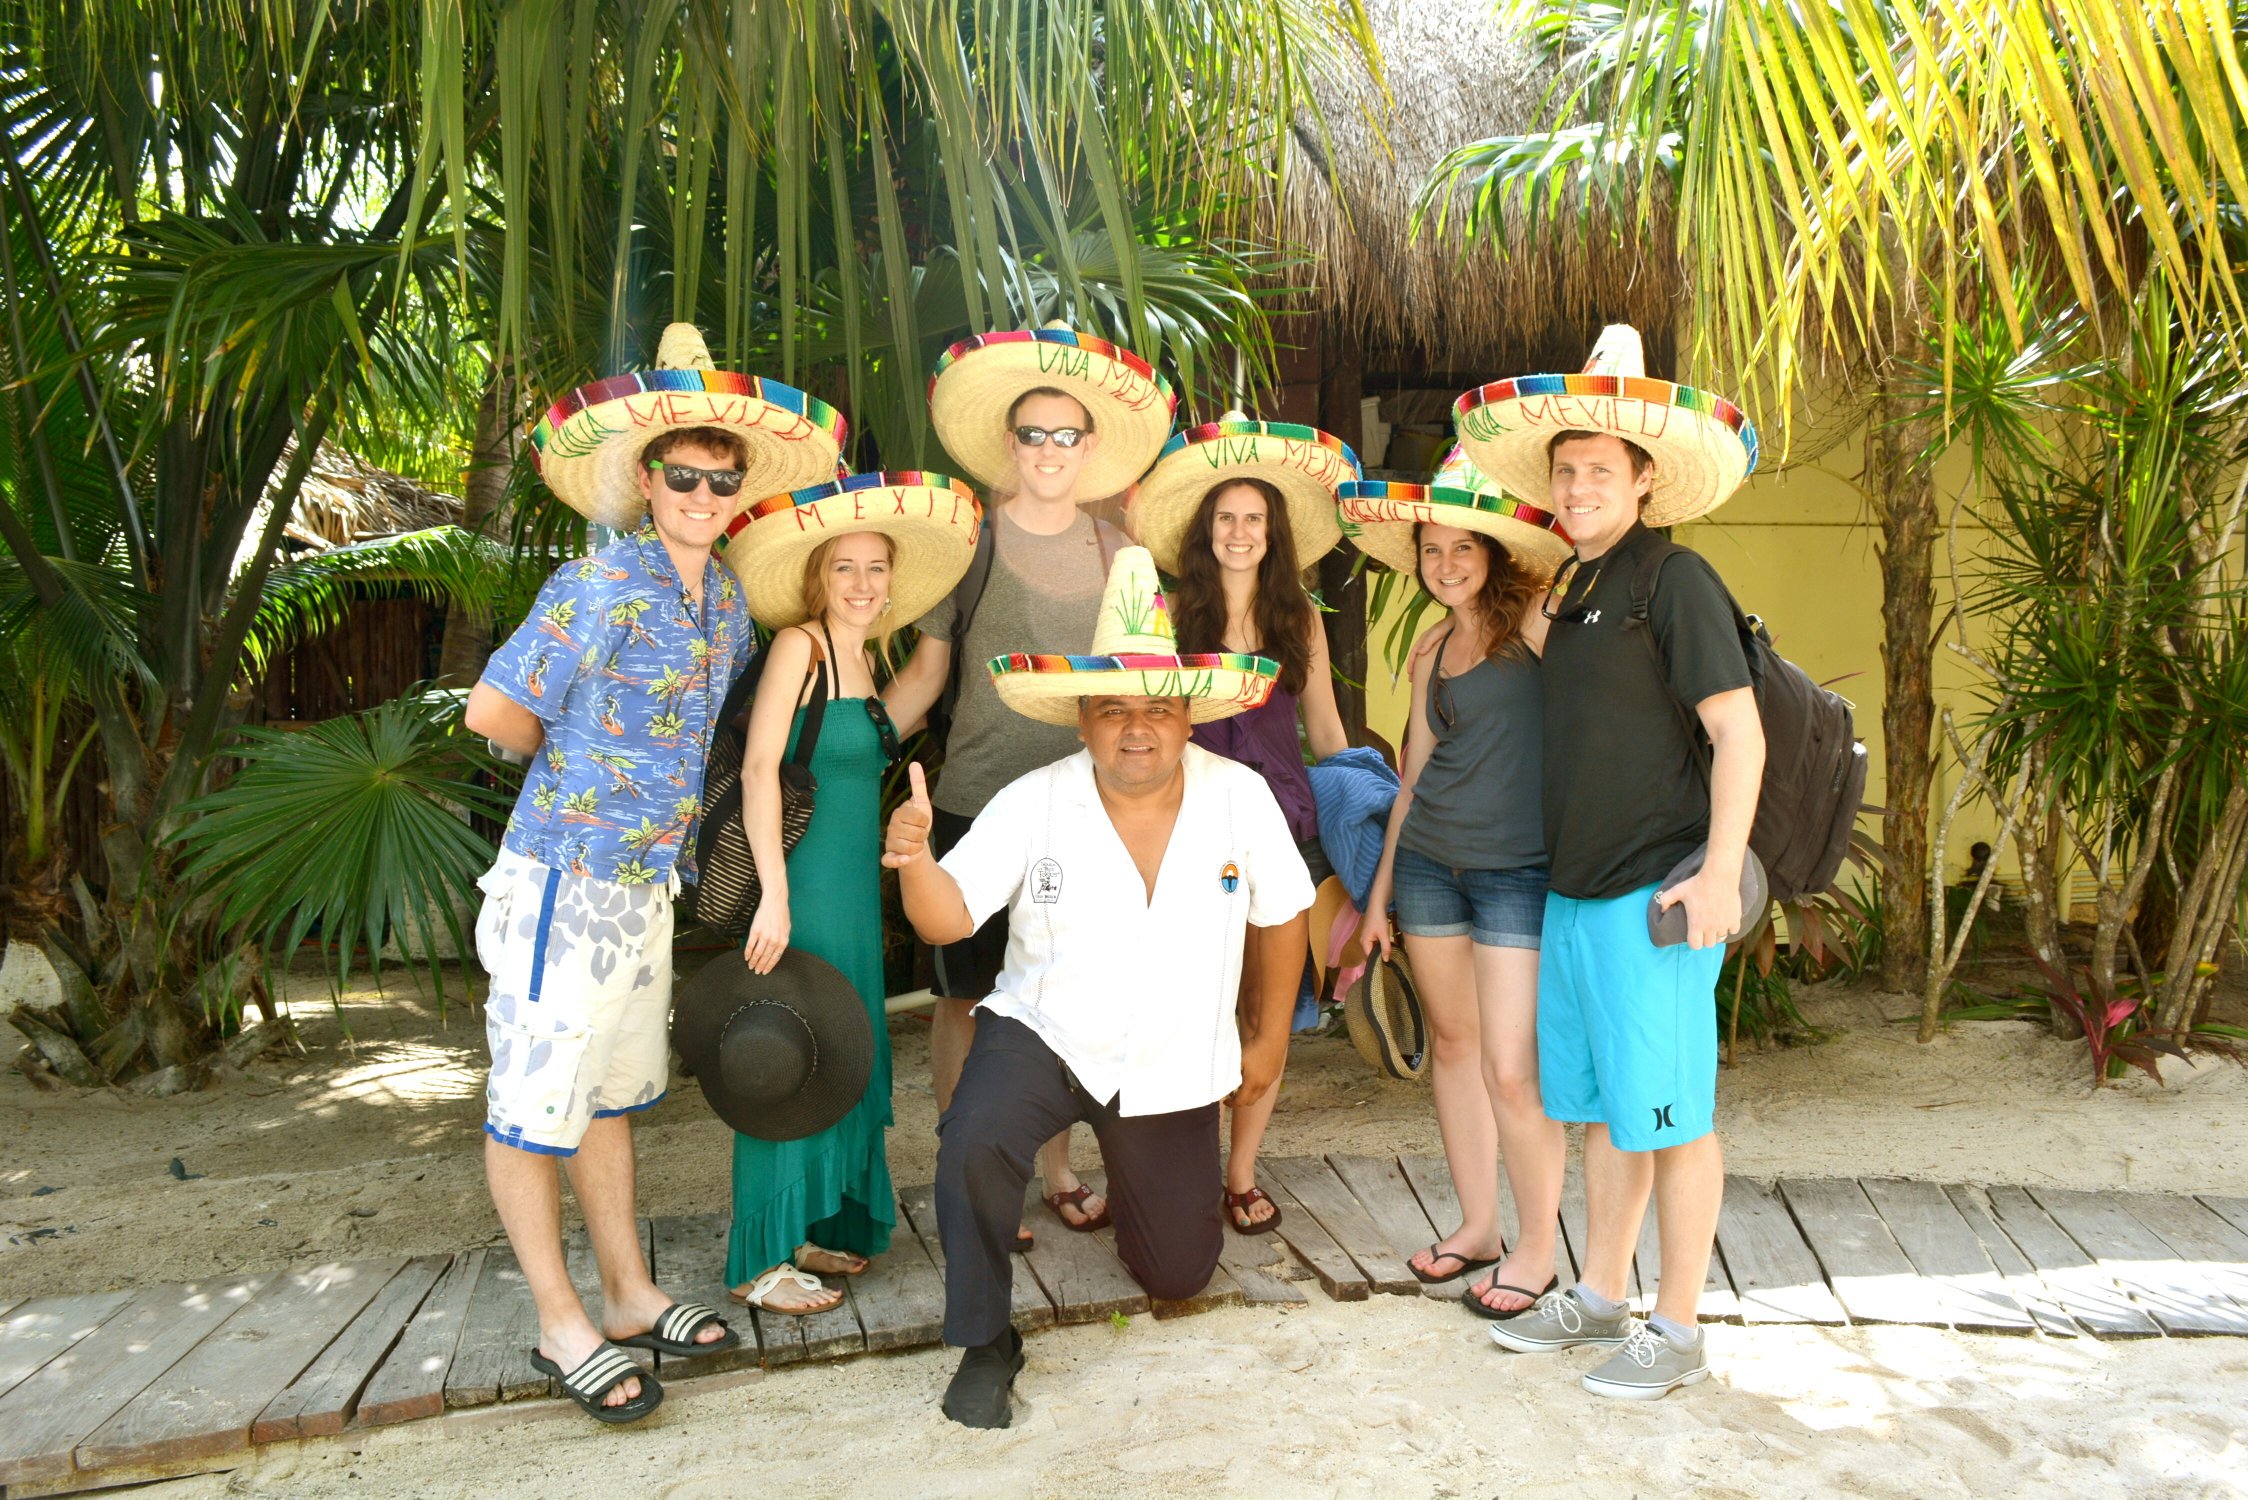 Cozumel Tours by Cab ? (@ToursbyCab) / Twitter